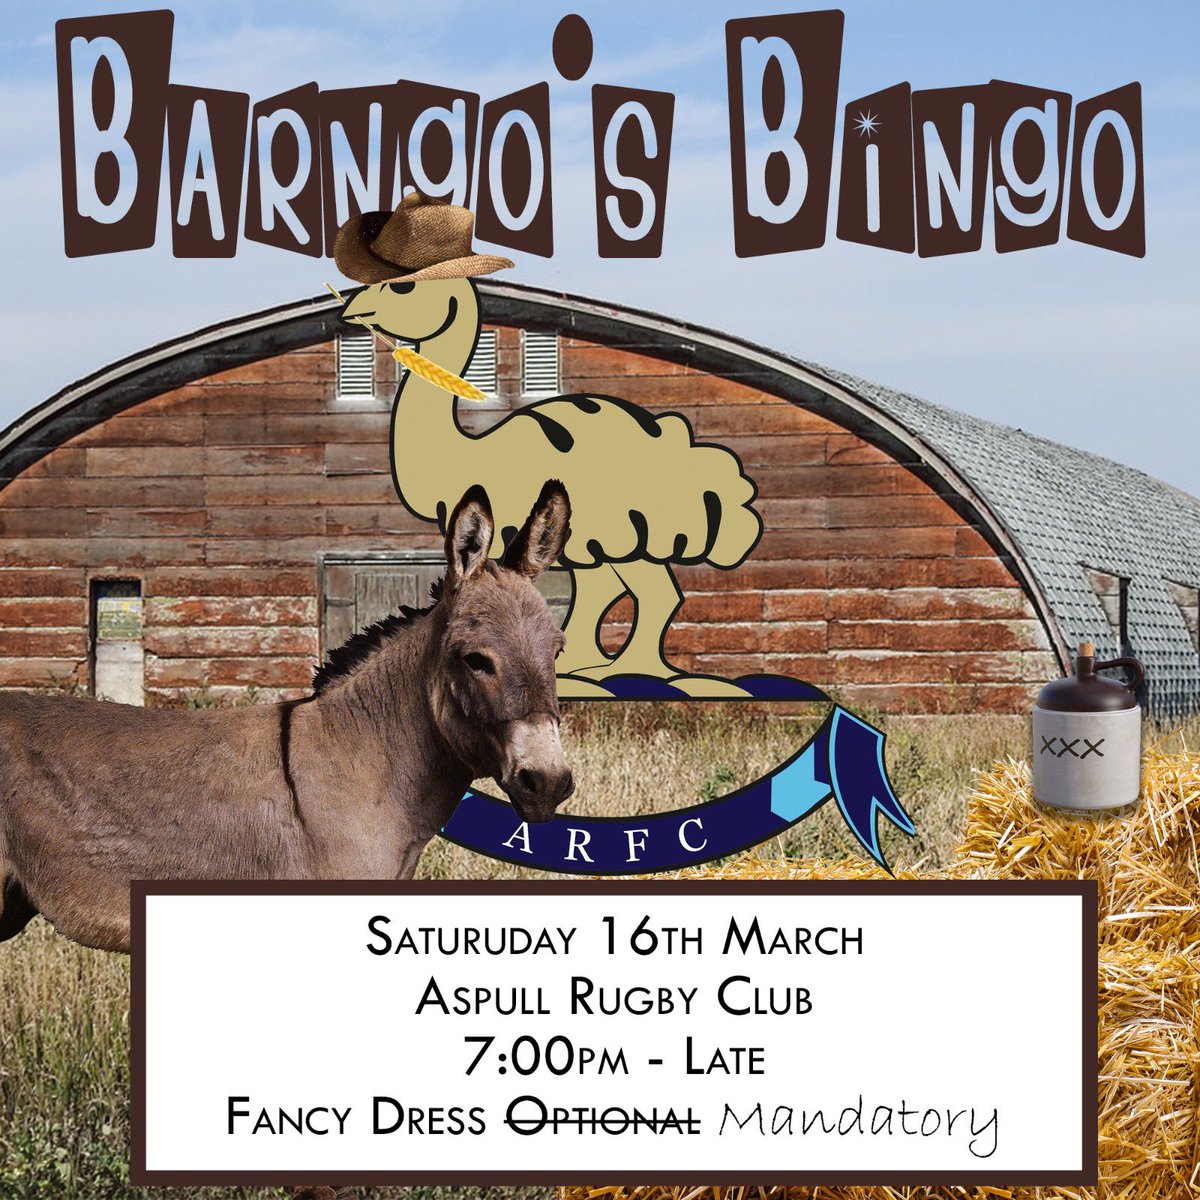 ITS BACK….. BIGGER THAN EVER BEFORE SO DIG OUT YOUR COWBOYS, COWGIRLS & COWTHEMS FANCY DRESS FOR SOME AUDIENCE PARTICIPATION AND SADDLE UP FOR…….. BARNGO BINGO 🤠 Last few tickets available please contact the socials team for tickets (Jon gav, matty Walker, Rods or Allan)